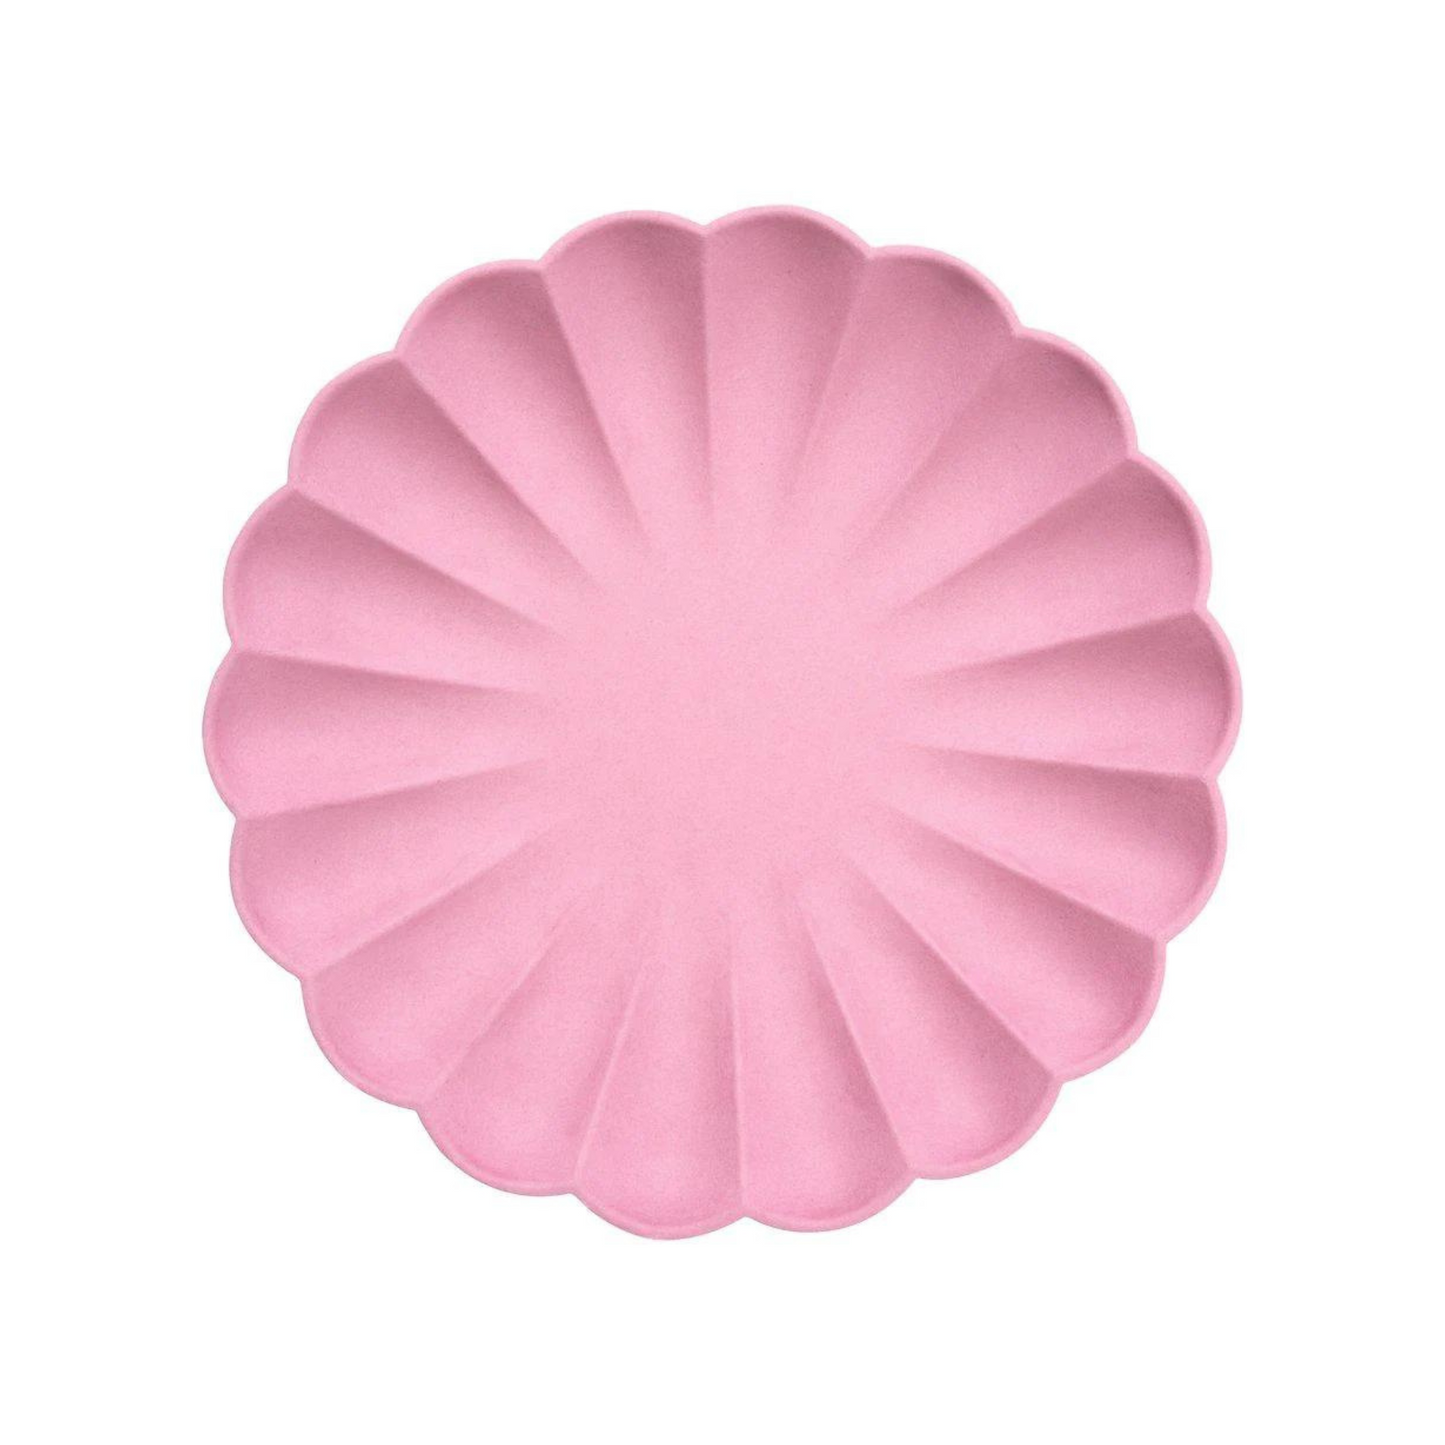 small deep pink eco friendly plates